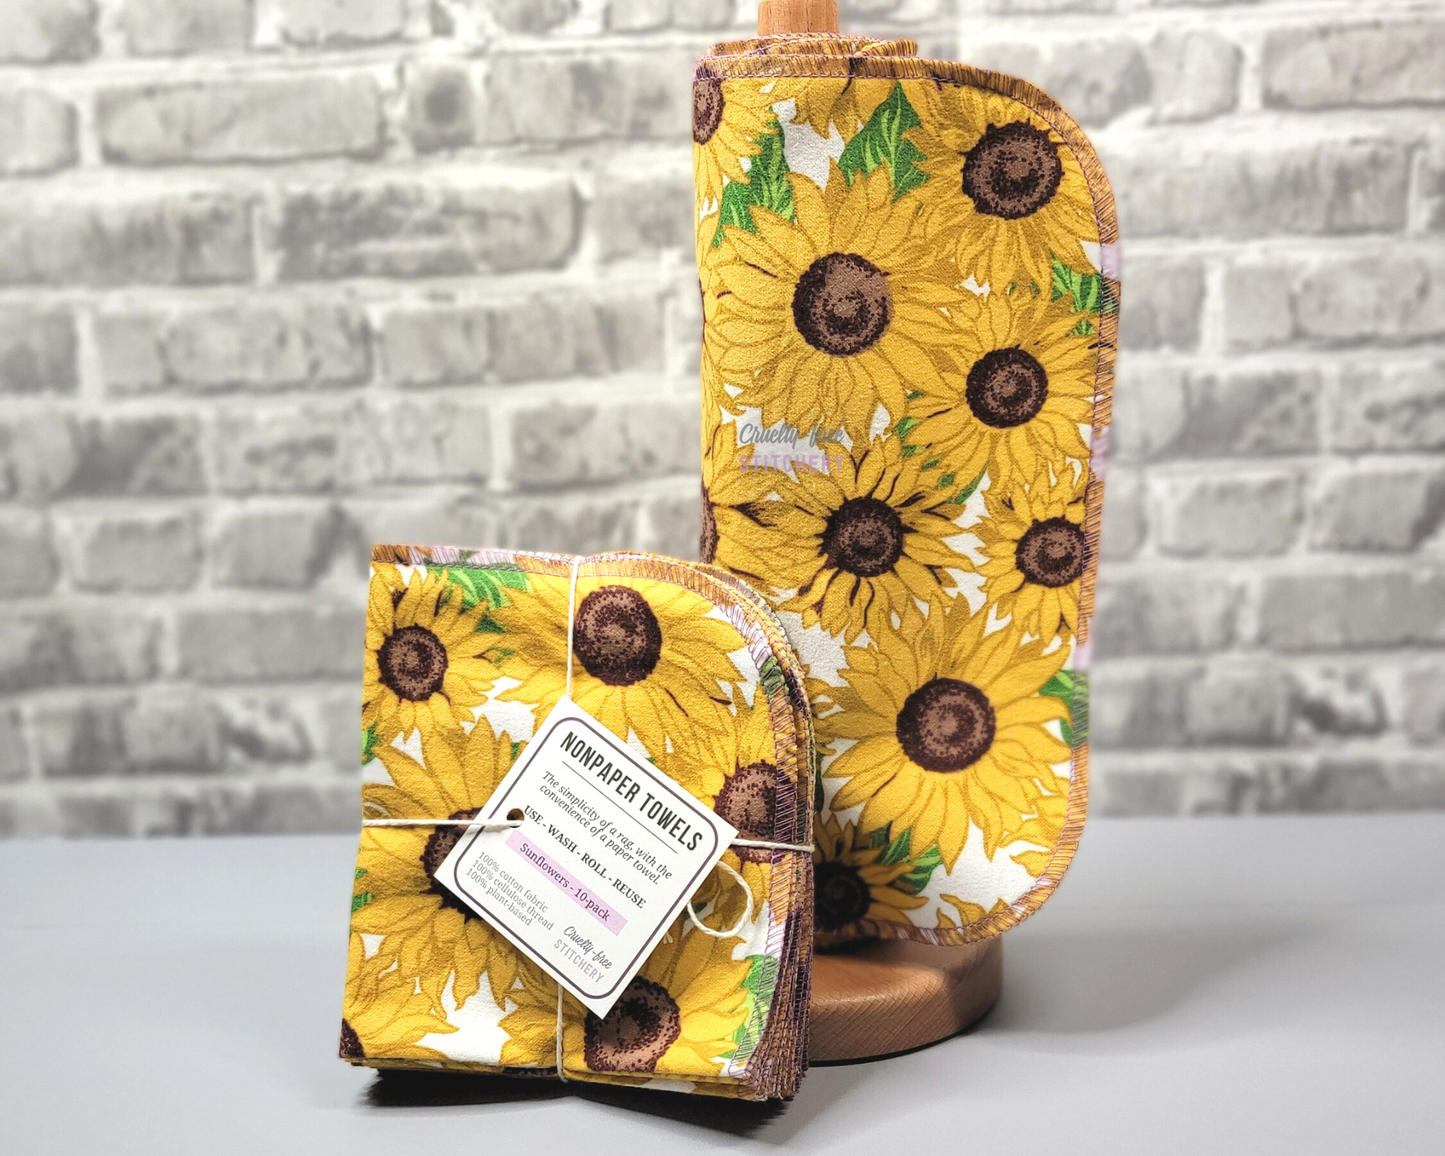 Sunflower print NonPaper Towels. Some are rolled onto a paper towel holder, next to a bundled pack. The print is bold yellow sunflowers with leaves and a white background. The edges are stitched with a light purple thread.